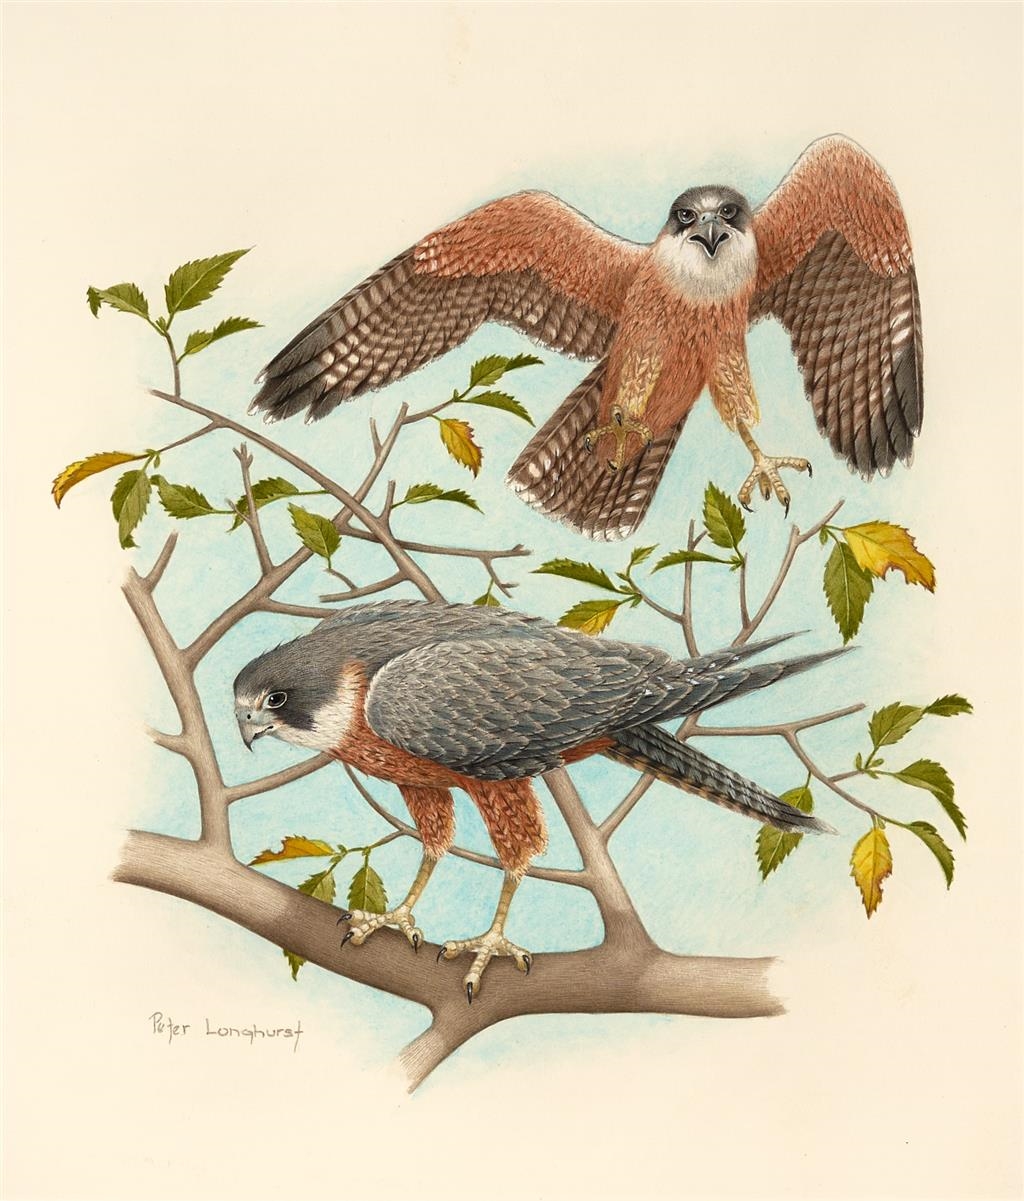 Artwork by Peter Longhurst, Falco Longipennis, Made of watercolour